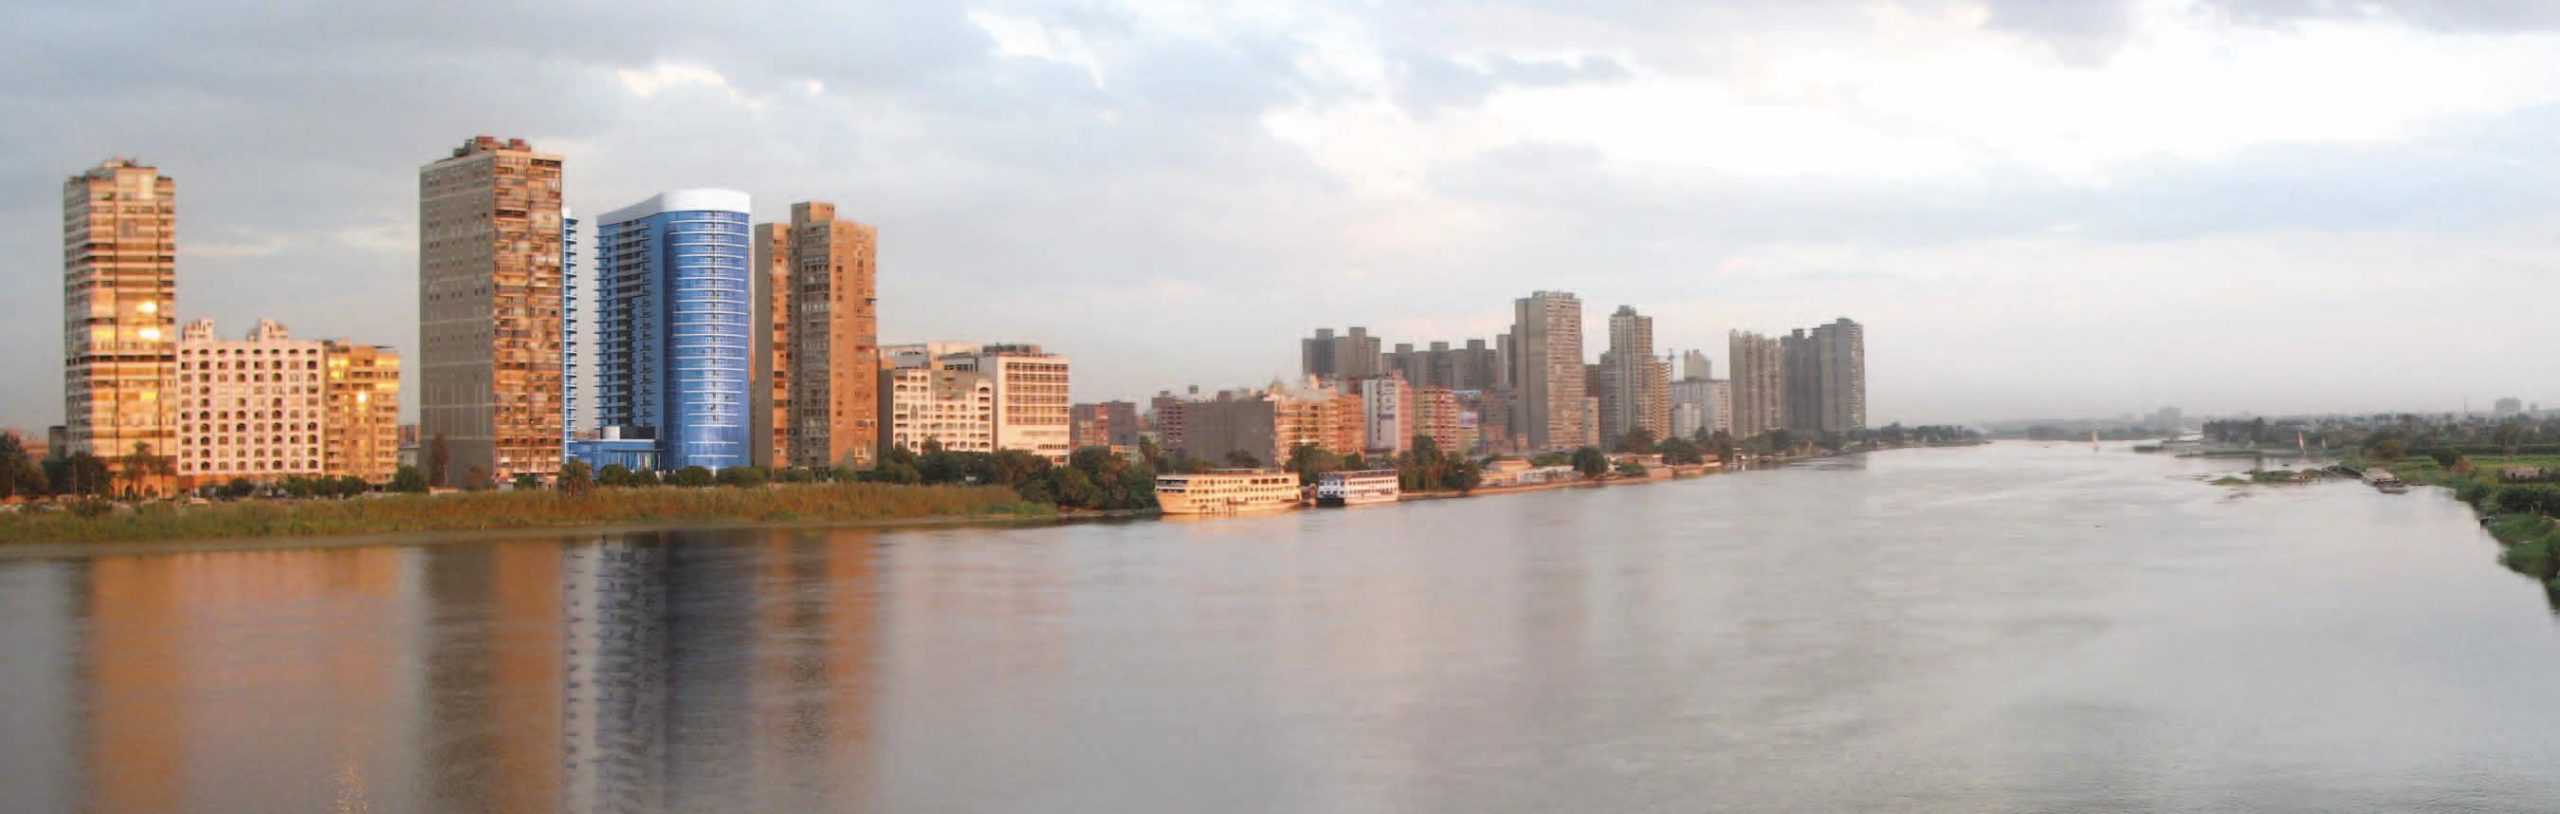 Special offer of 261m Apartment for sale in Secon Nile Towers with distinctive location